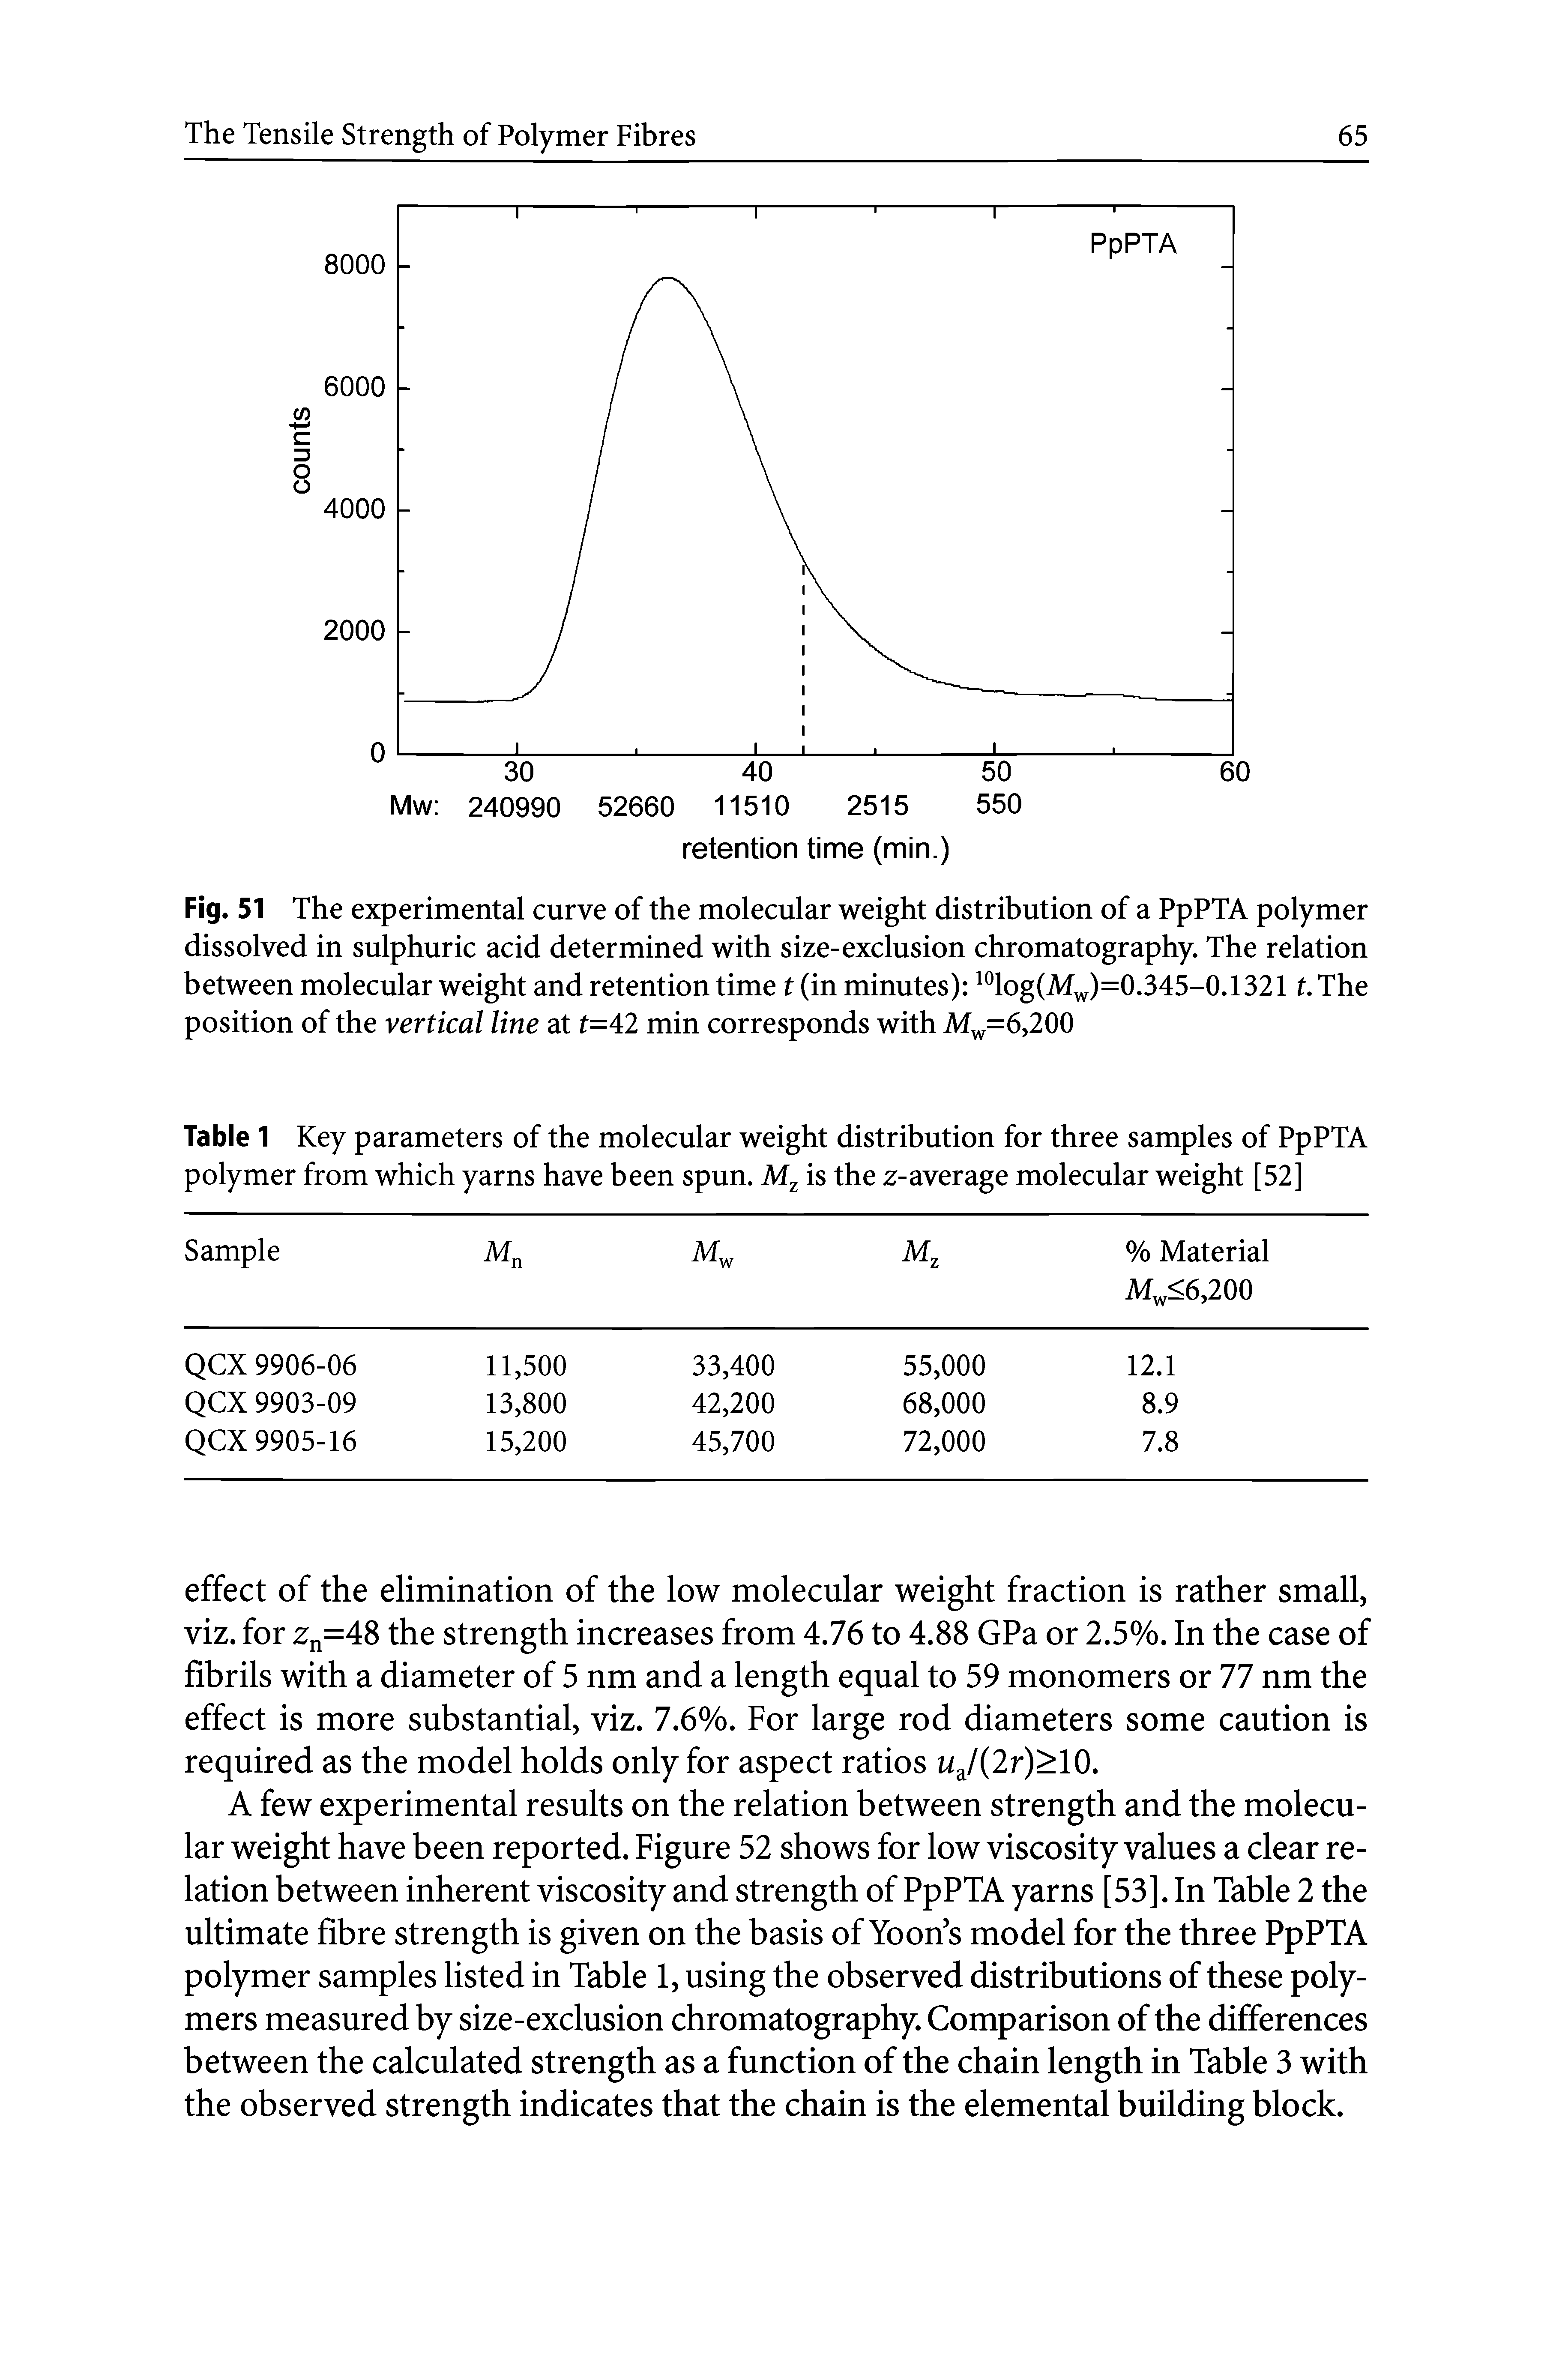 Table 1 Key parameters of the molecular weight distribution for three samples of PpPTA polymer from which yarns have been spun. Mz is the z-average molecular weight [52]...